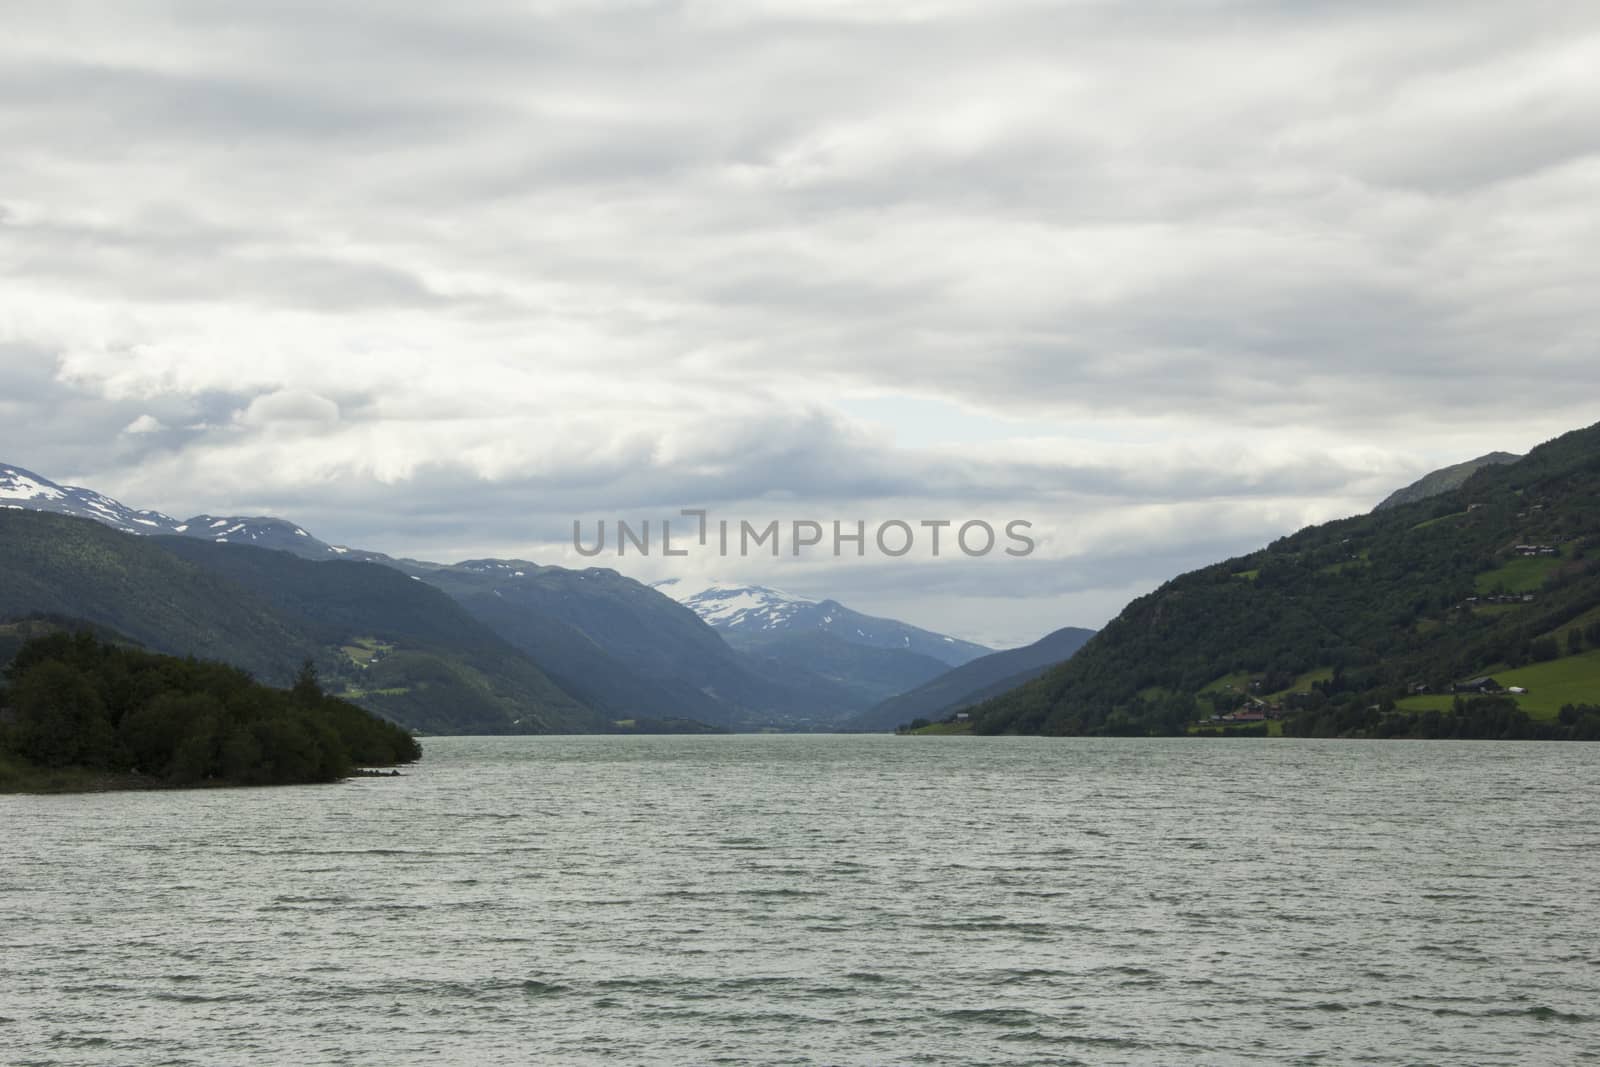 View of a lake with mountain in background